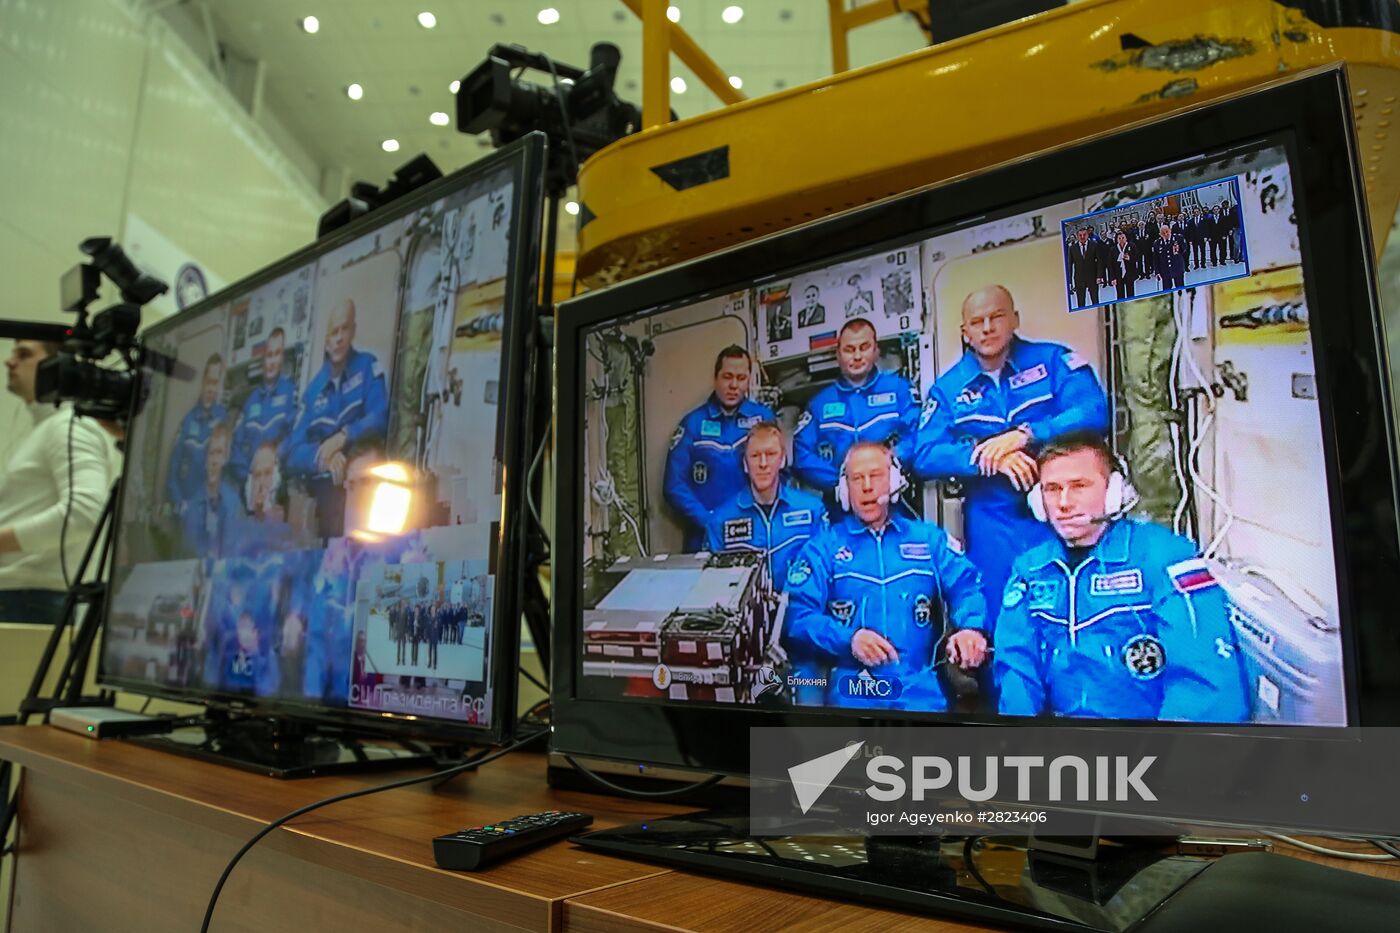 Aviation and Cosmonautics Day celebrated at the Vostochny Space Center in the Amur Region